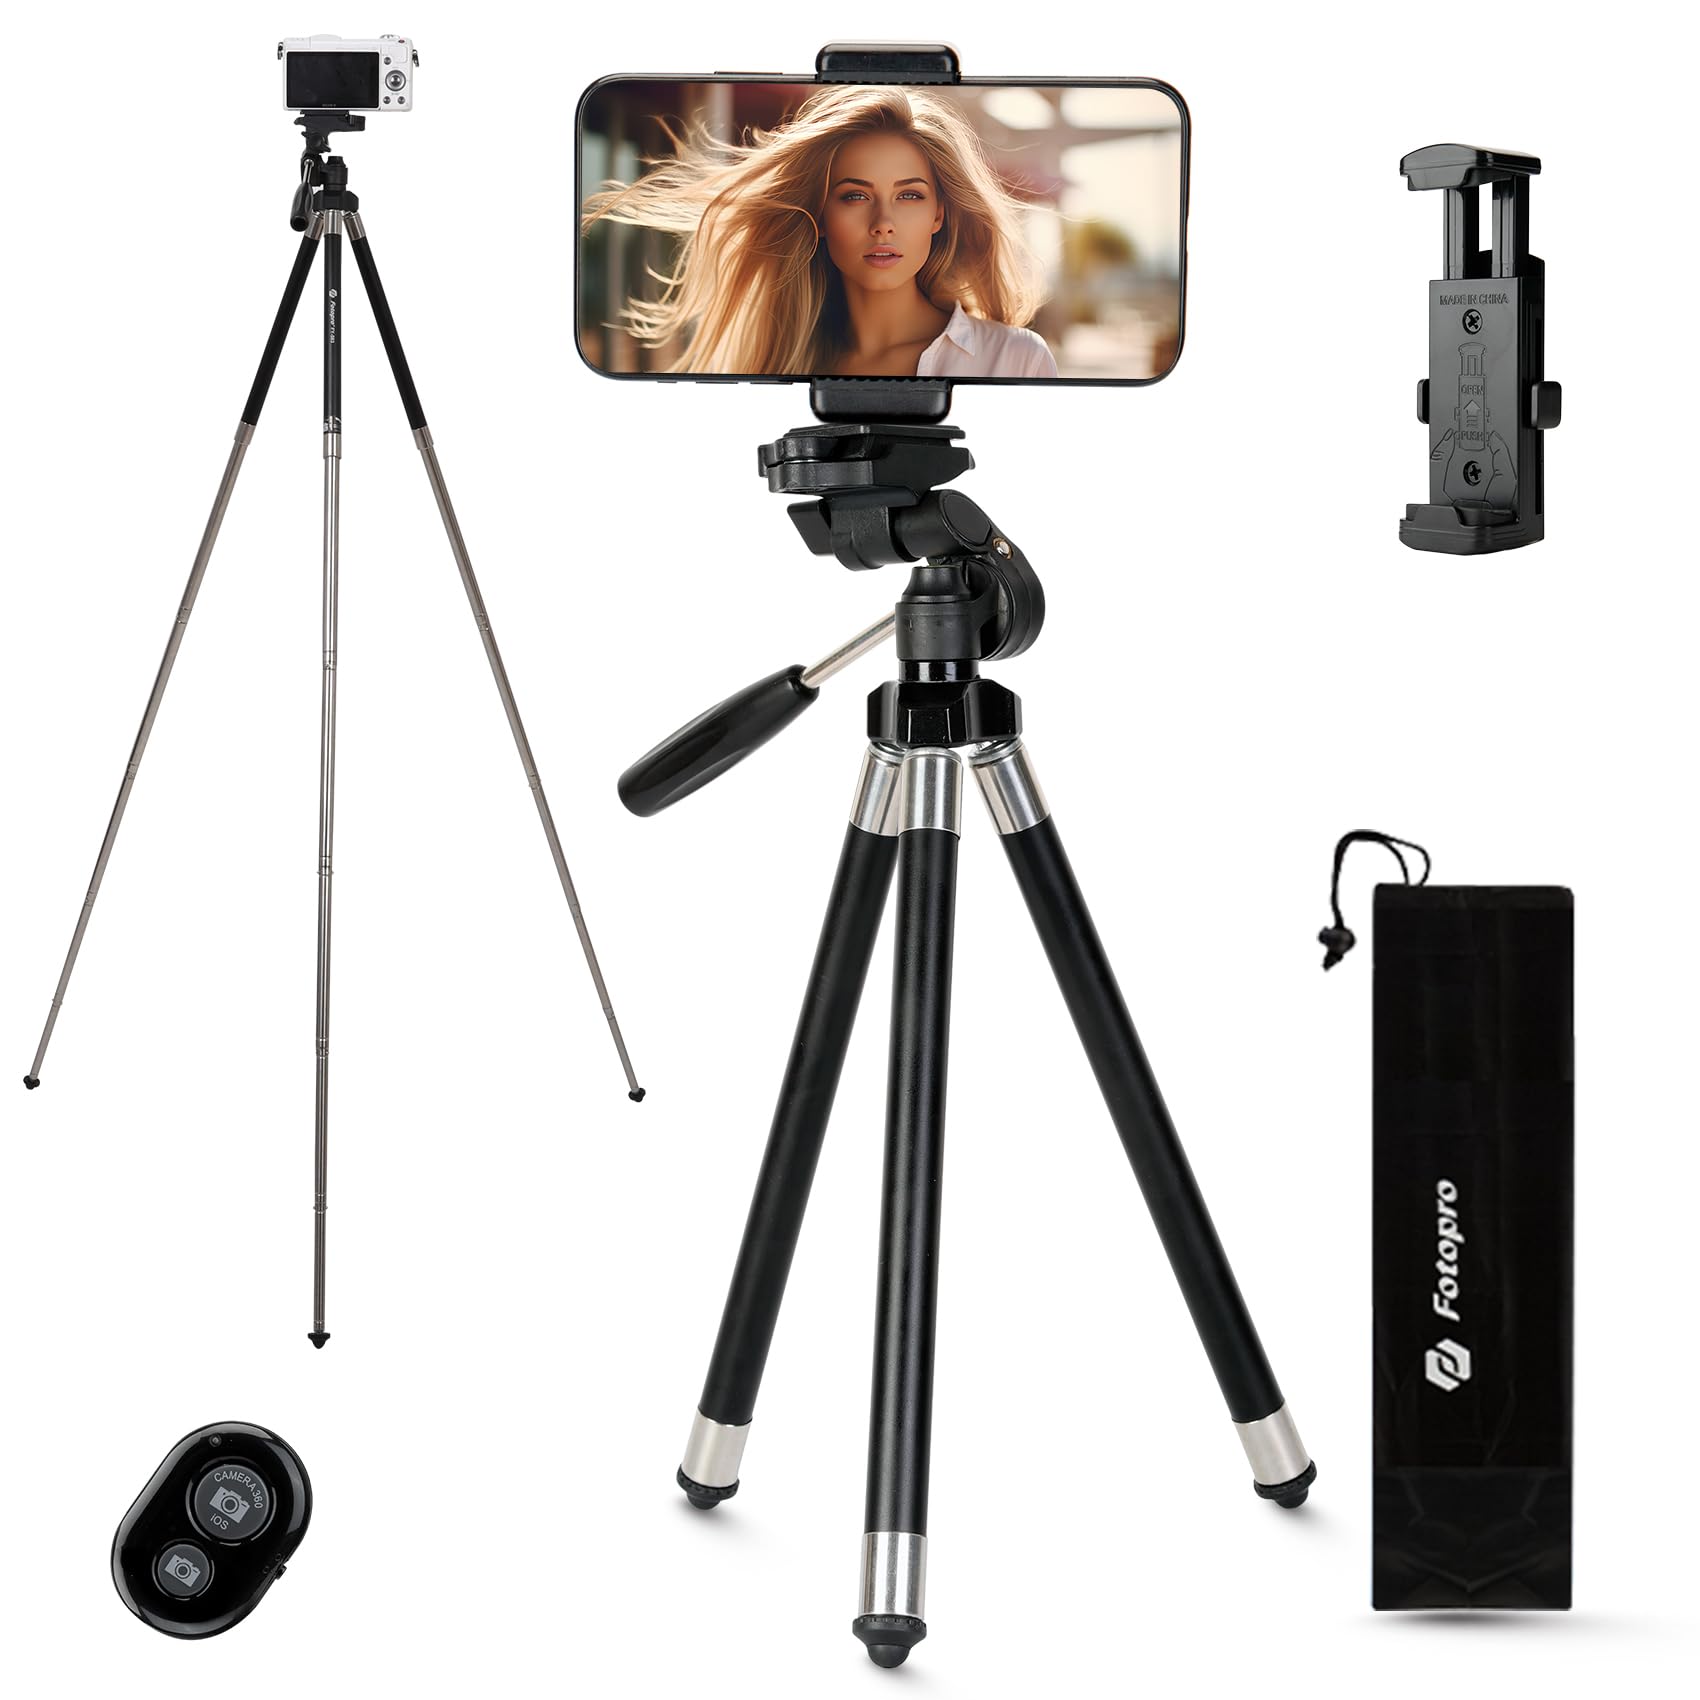 Fotopro Lightweight Phone Tripod with Remote,40 inches Camera Tripod Stand FY 583 with Bag Phone Mount for iPhone Camera